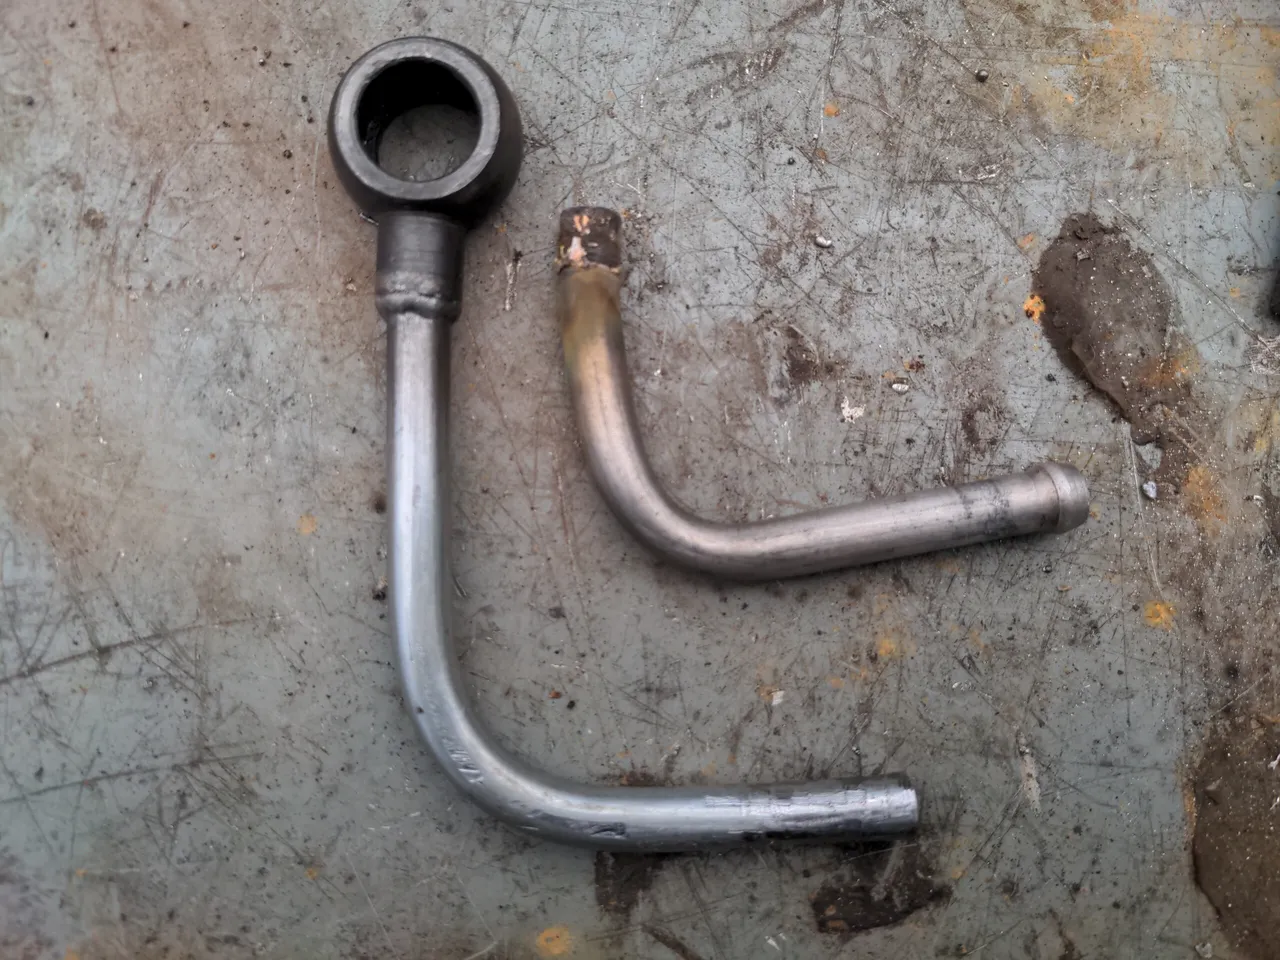 The water drain pipe is a 90 degree nickel-steel pipe, with a banjo bolt at one end. Here, the old one is shown next to the new one. The new one is about an inch or so longer on one of its lengths.